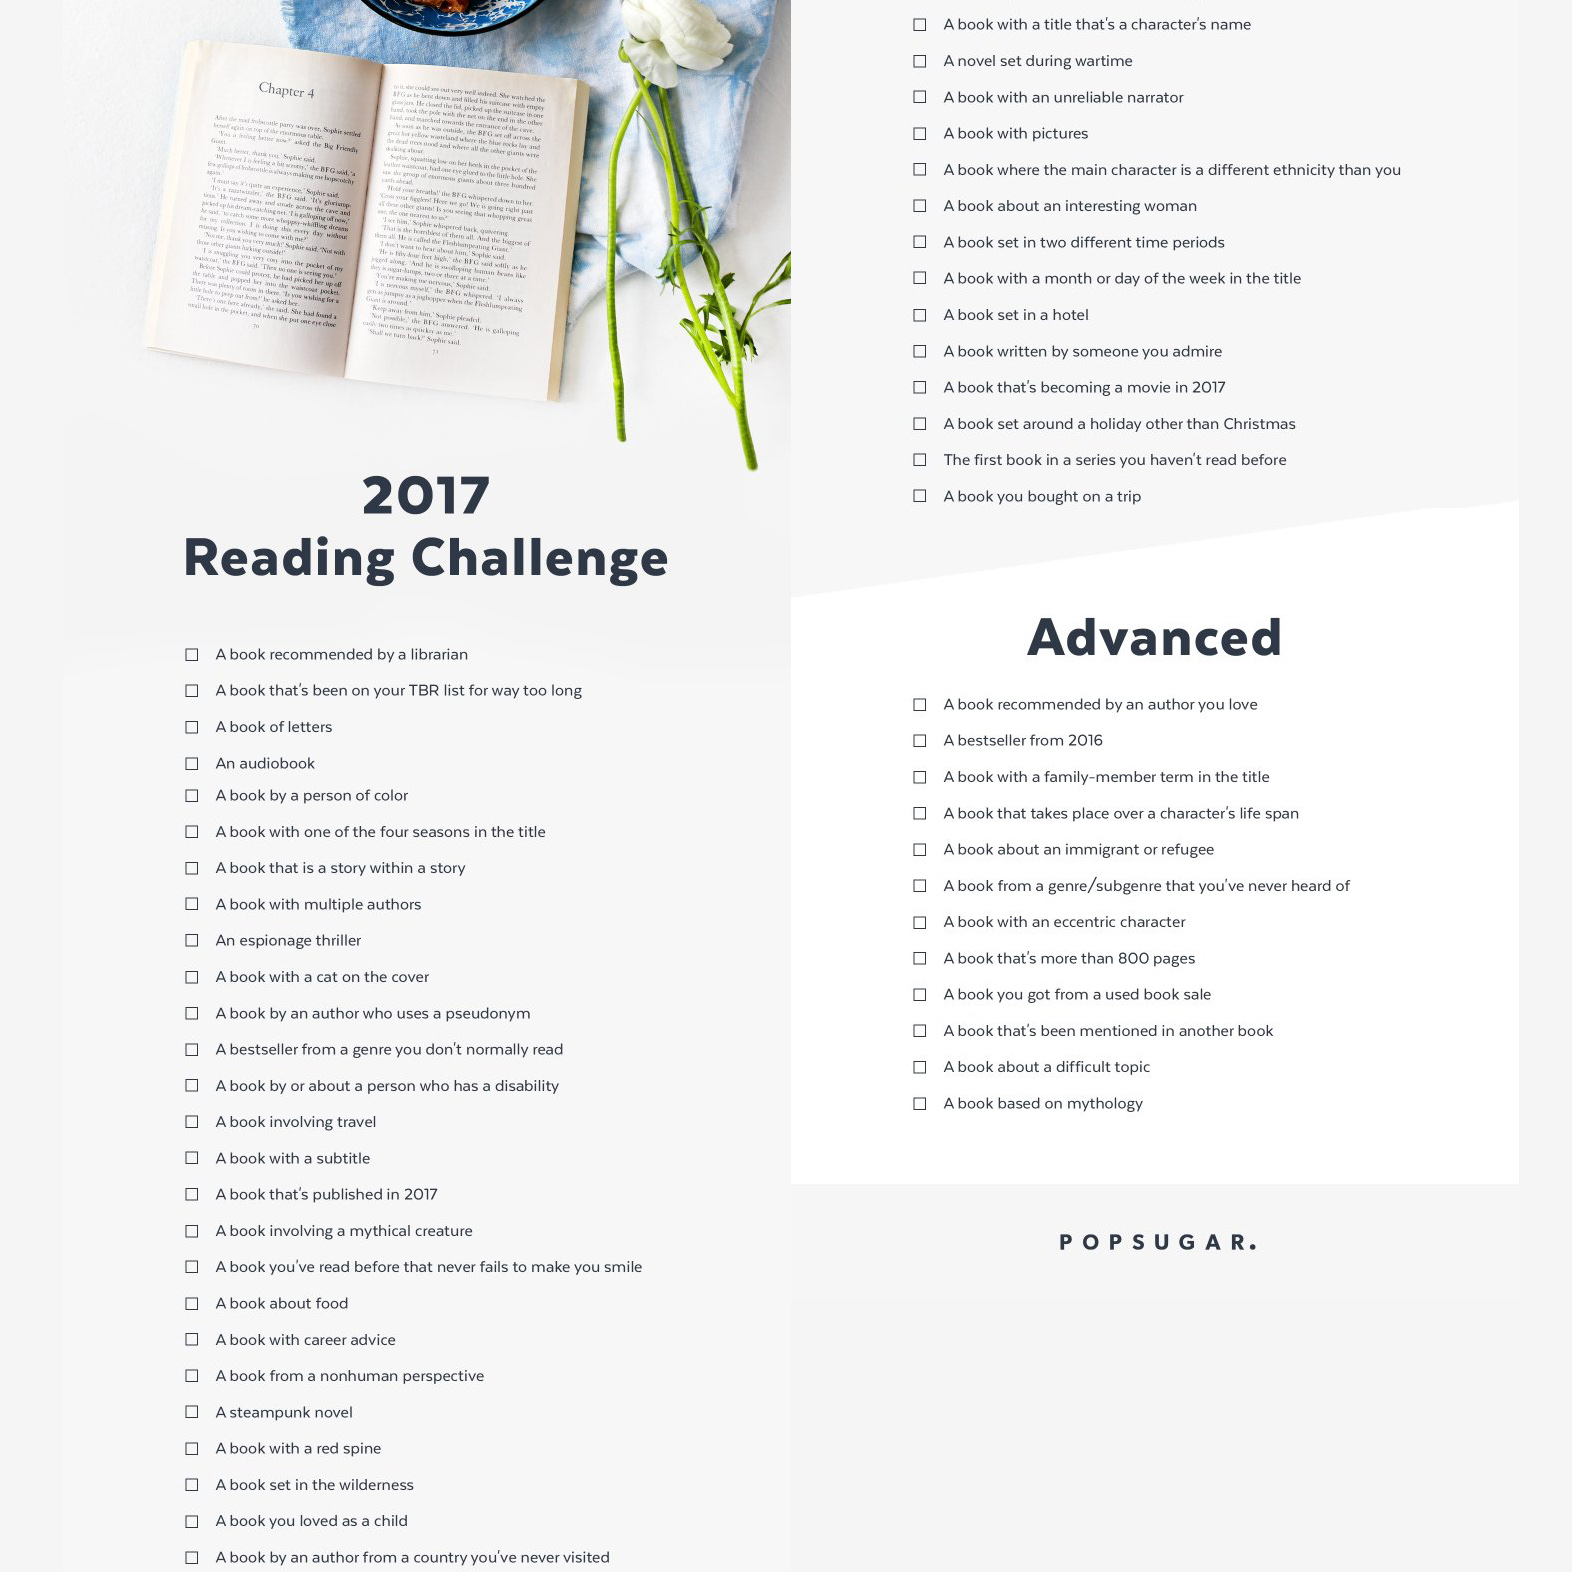 Hearth and Pages ULTIMATE POP SUGAR READING CHALLENGE